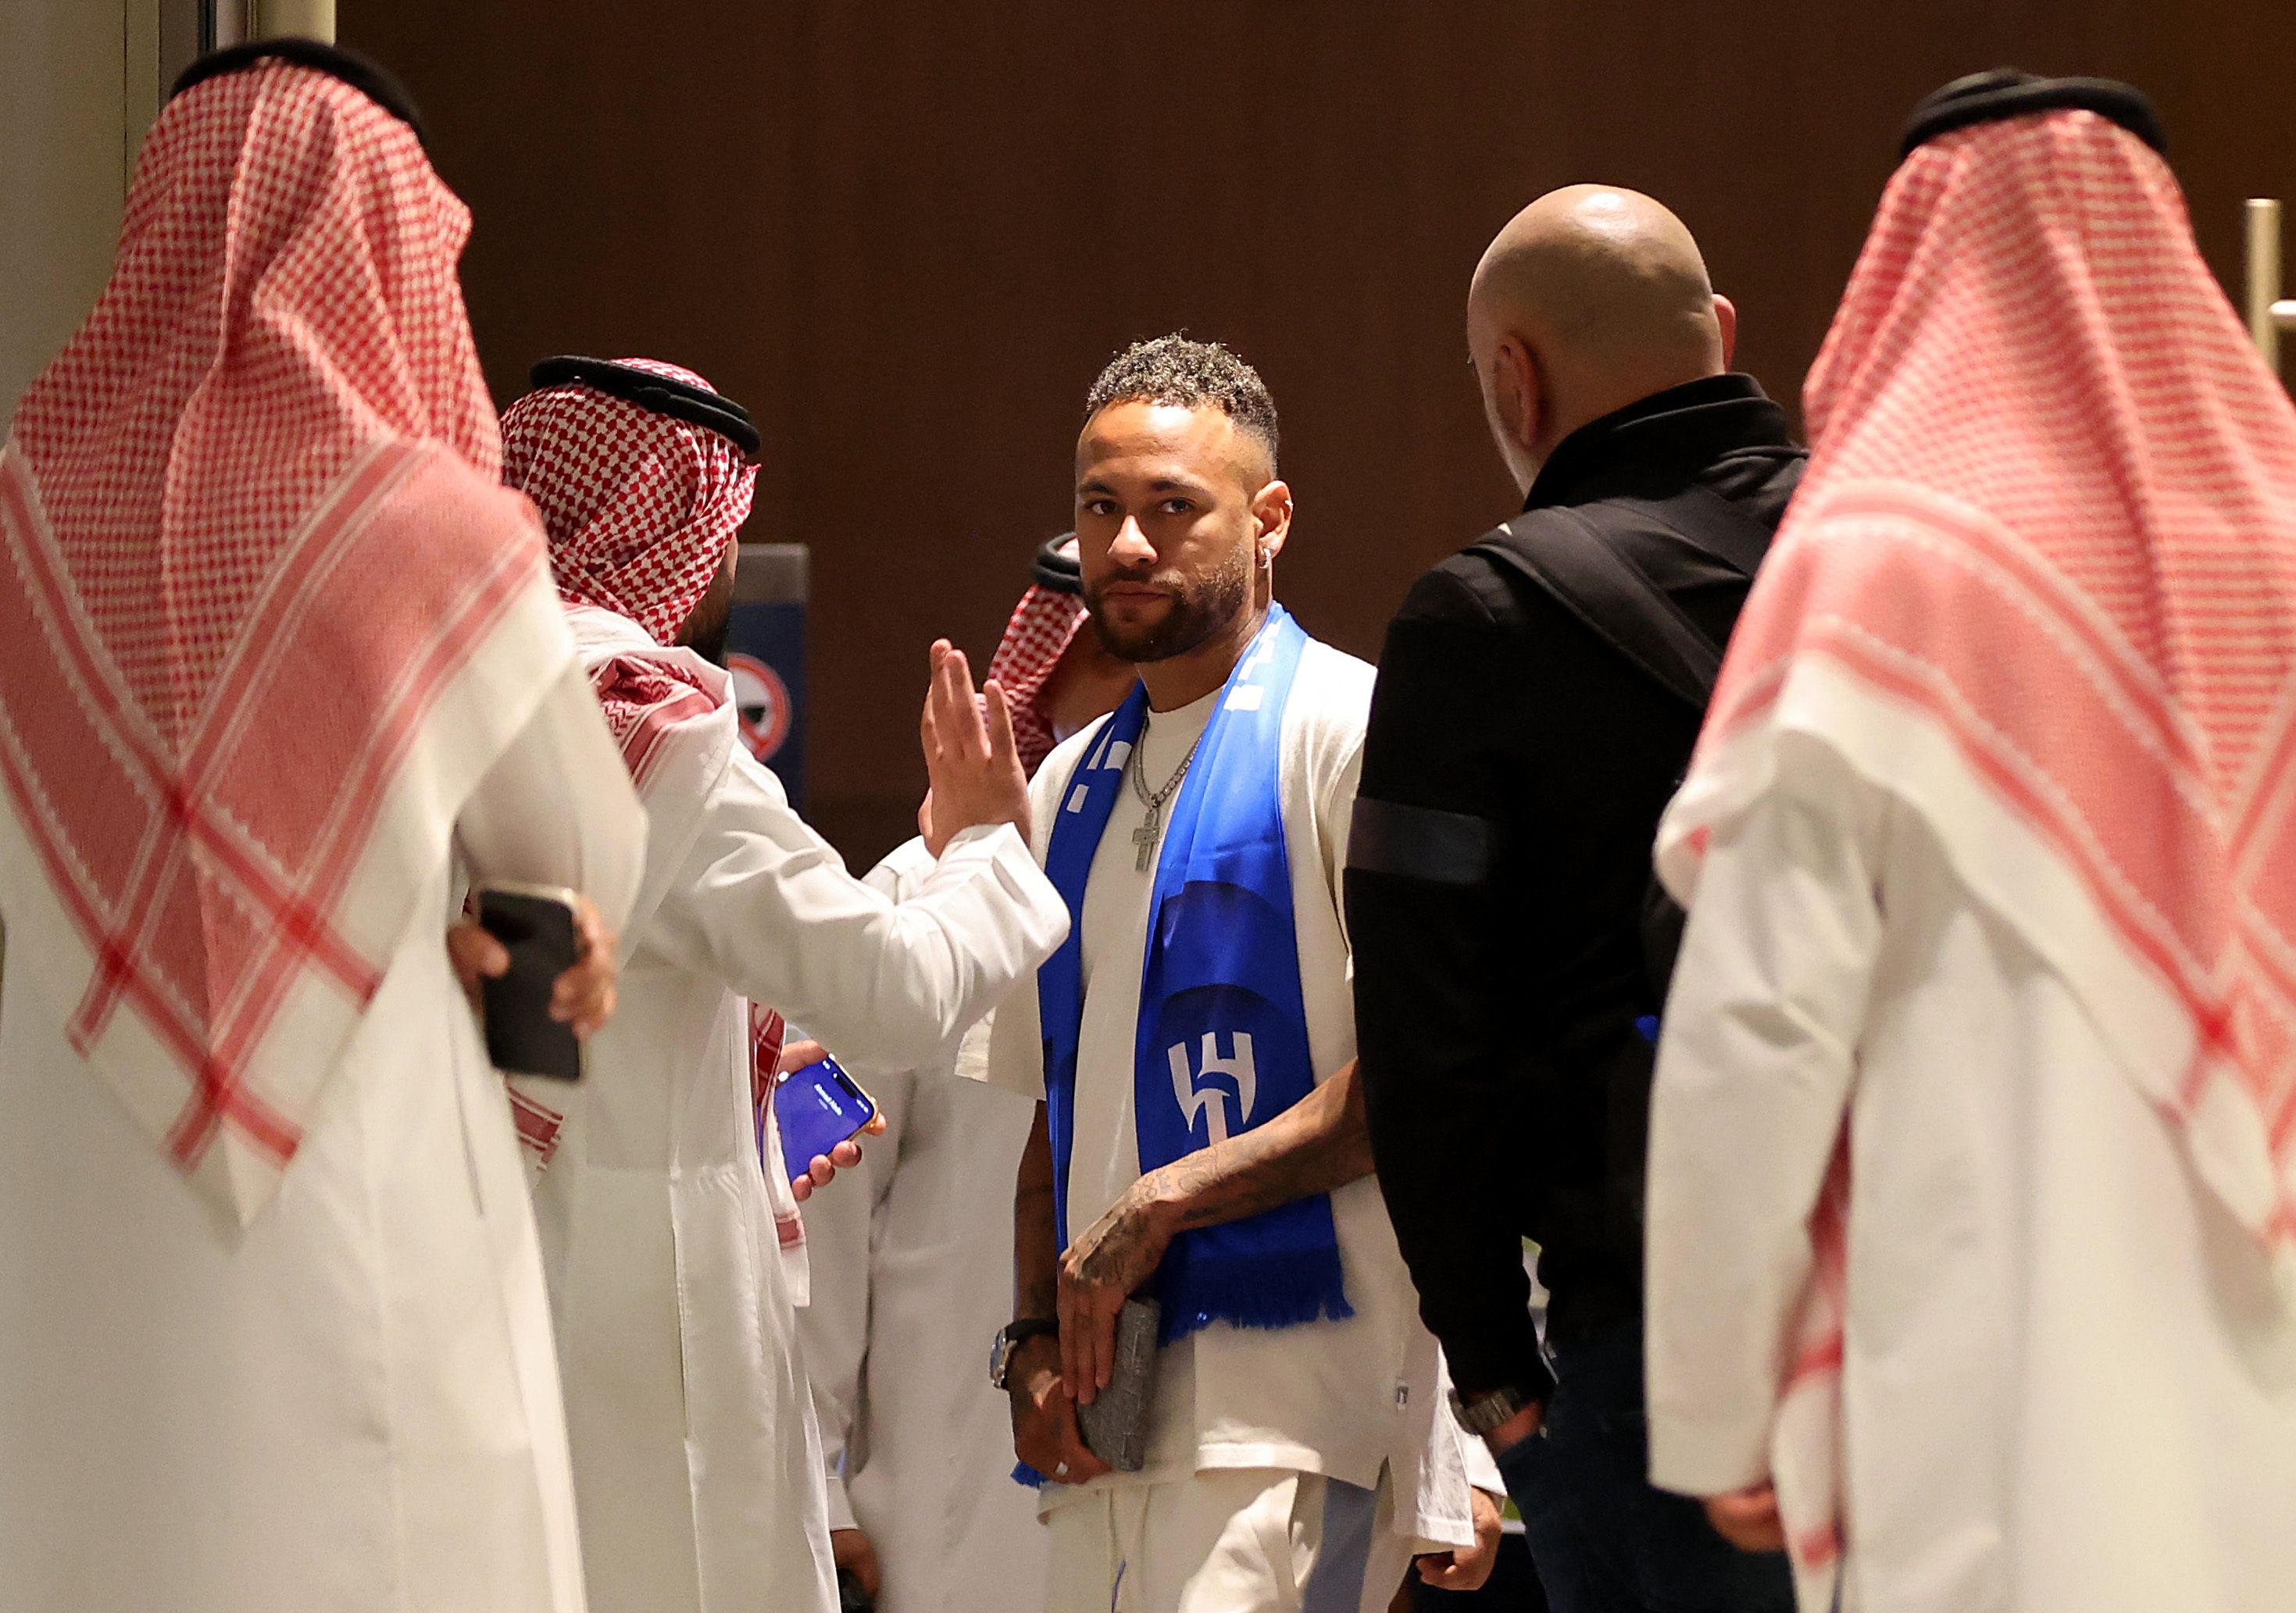 Neymar arrived in Saudi Arabia and is greeted by the board of of Saudi Pro League club Al Hilal